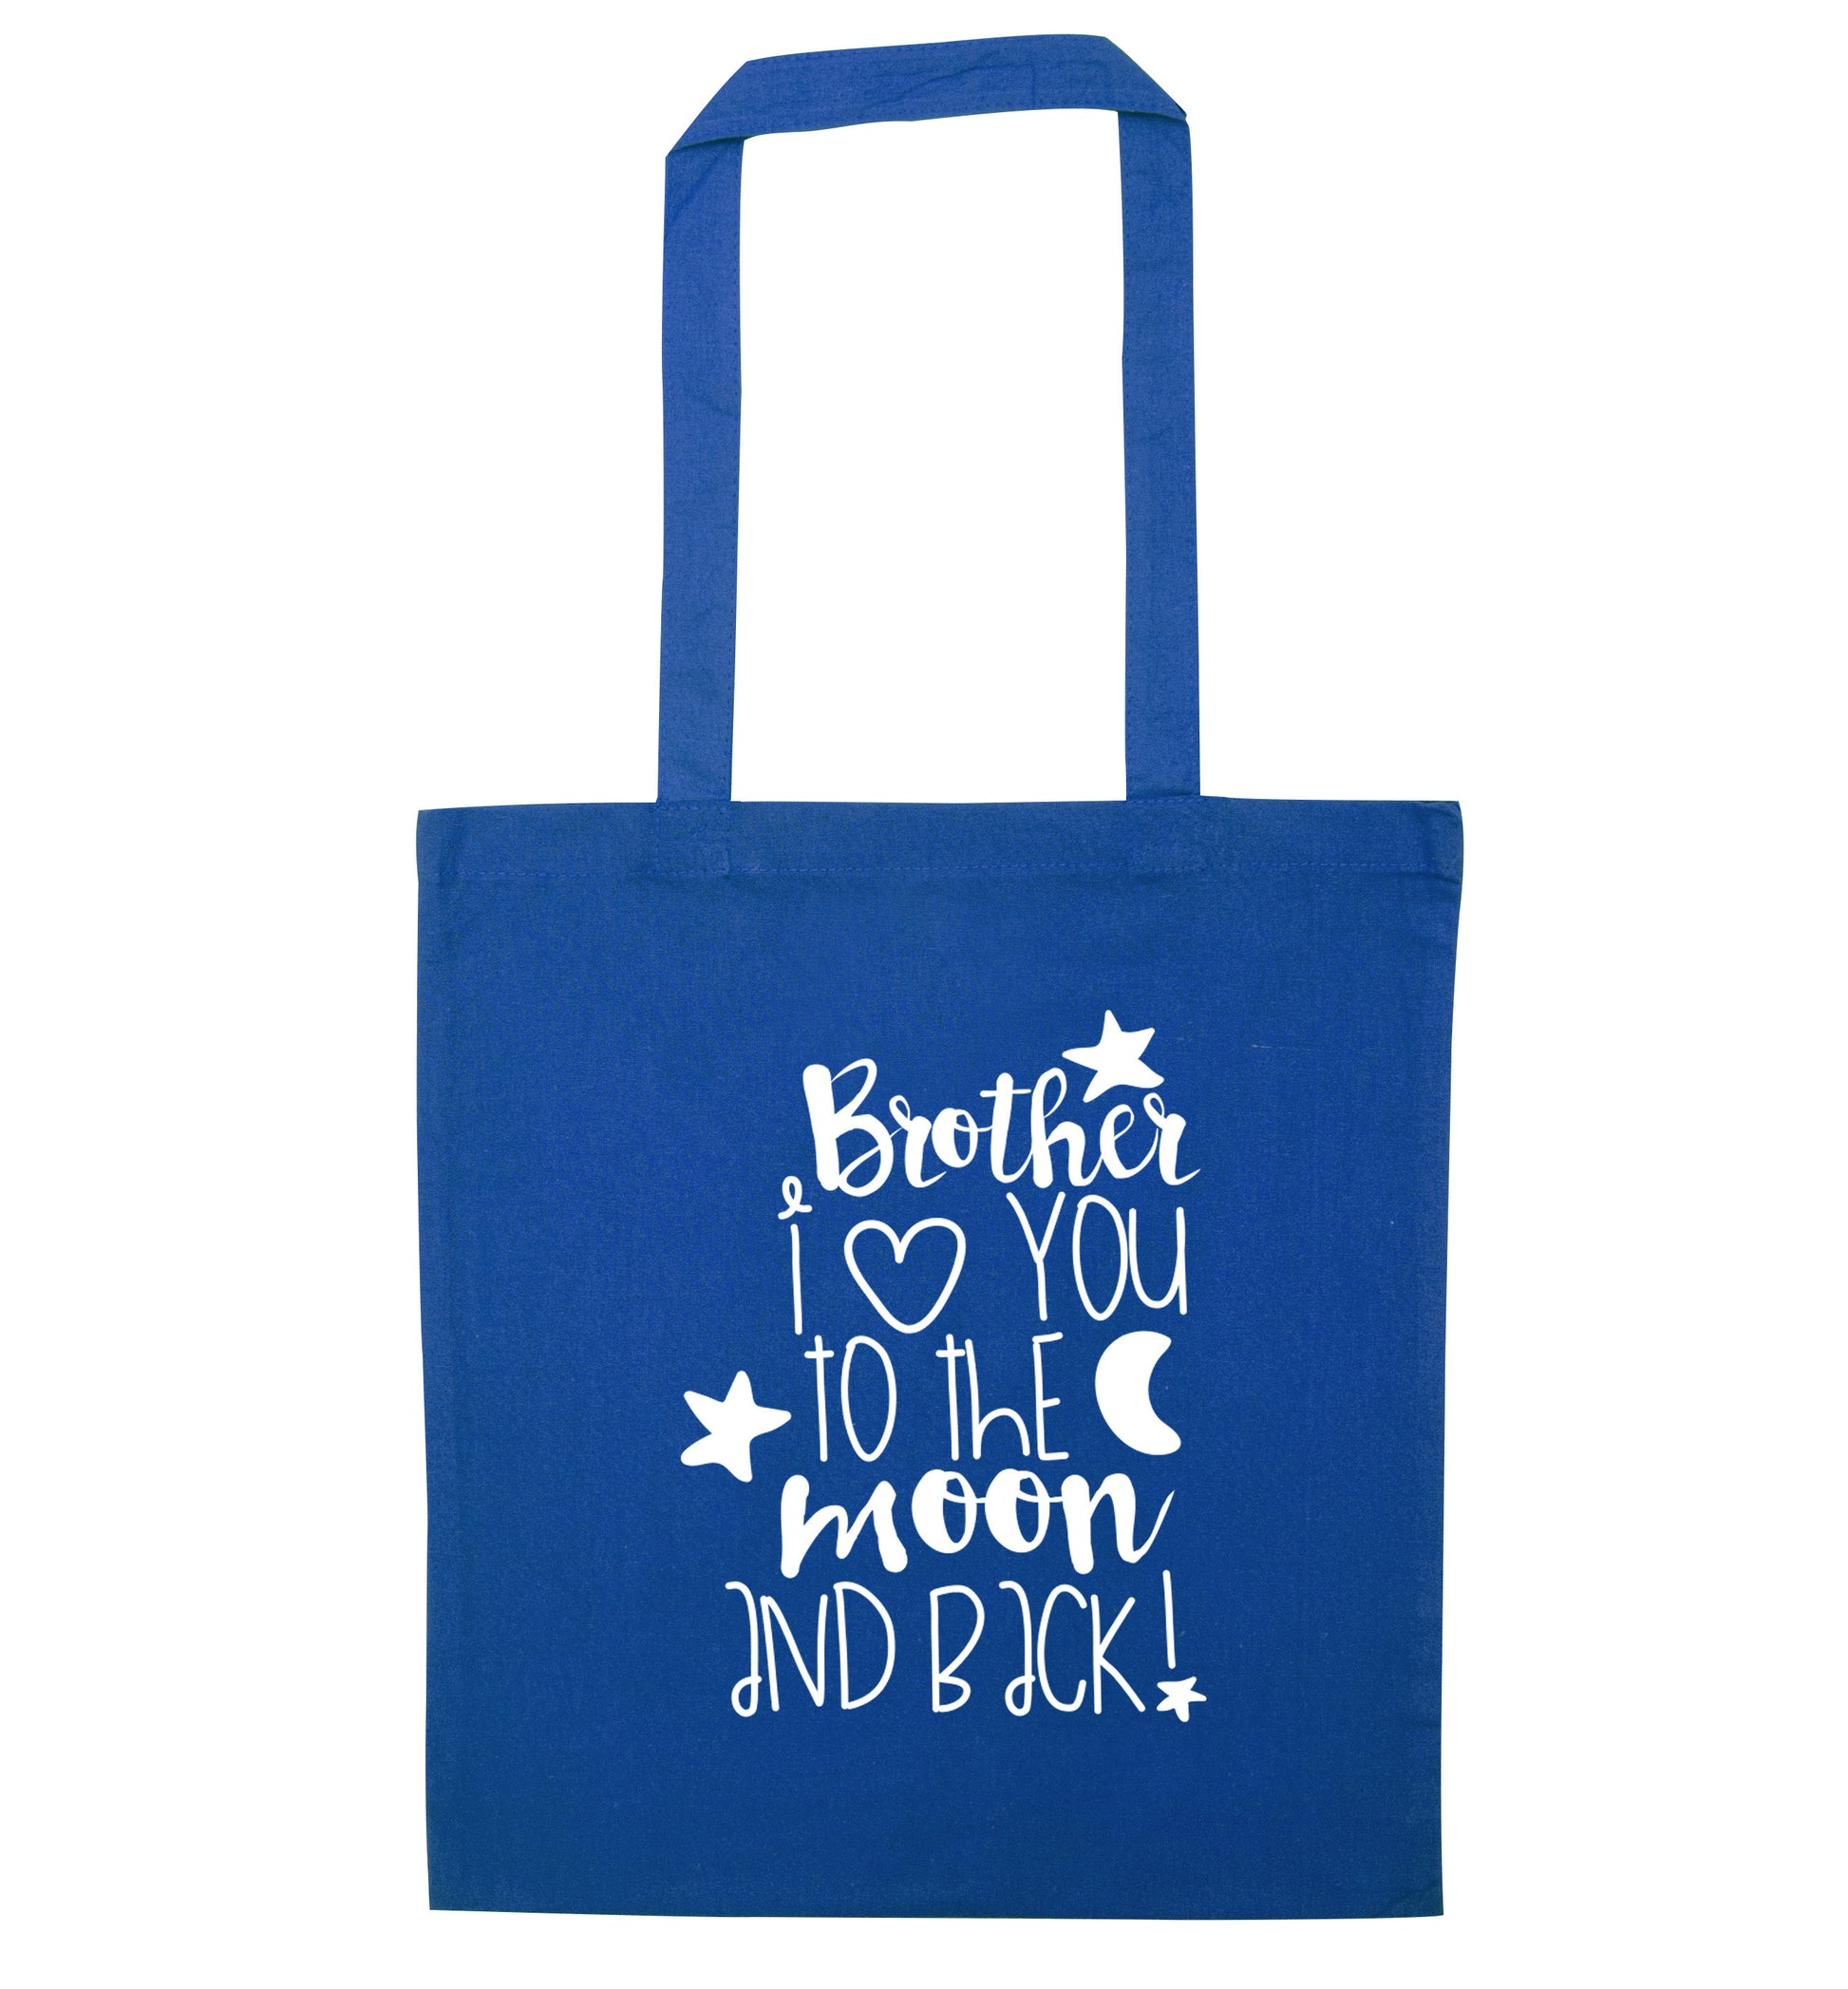 Brother I love you to the moon and back blue tote bag